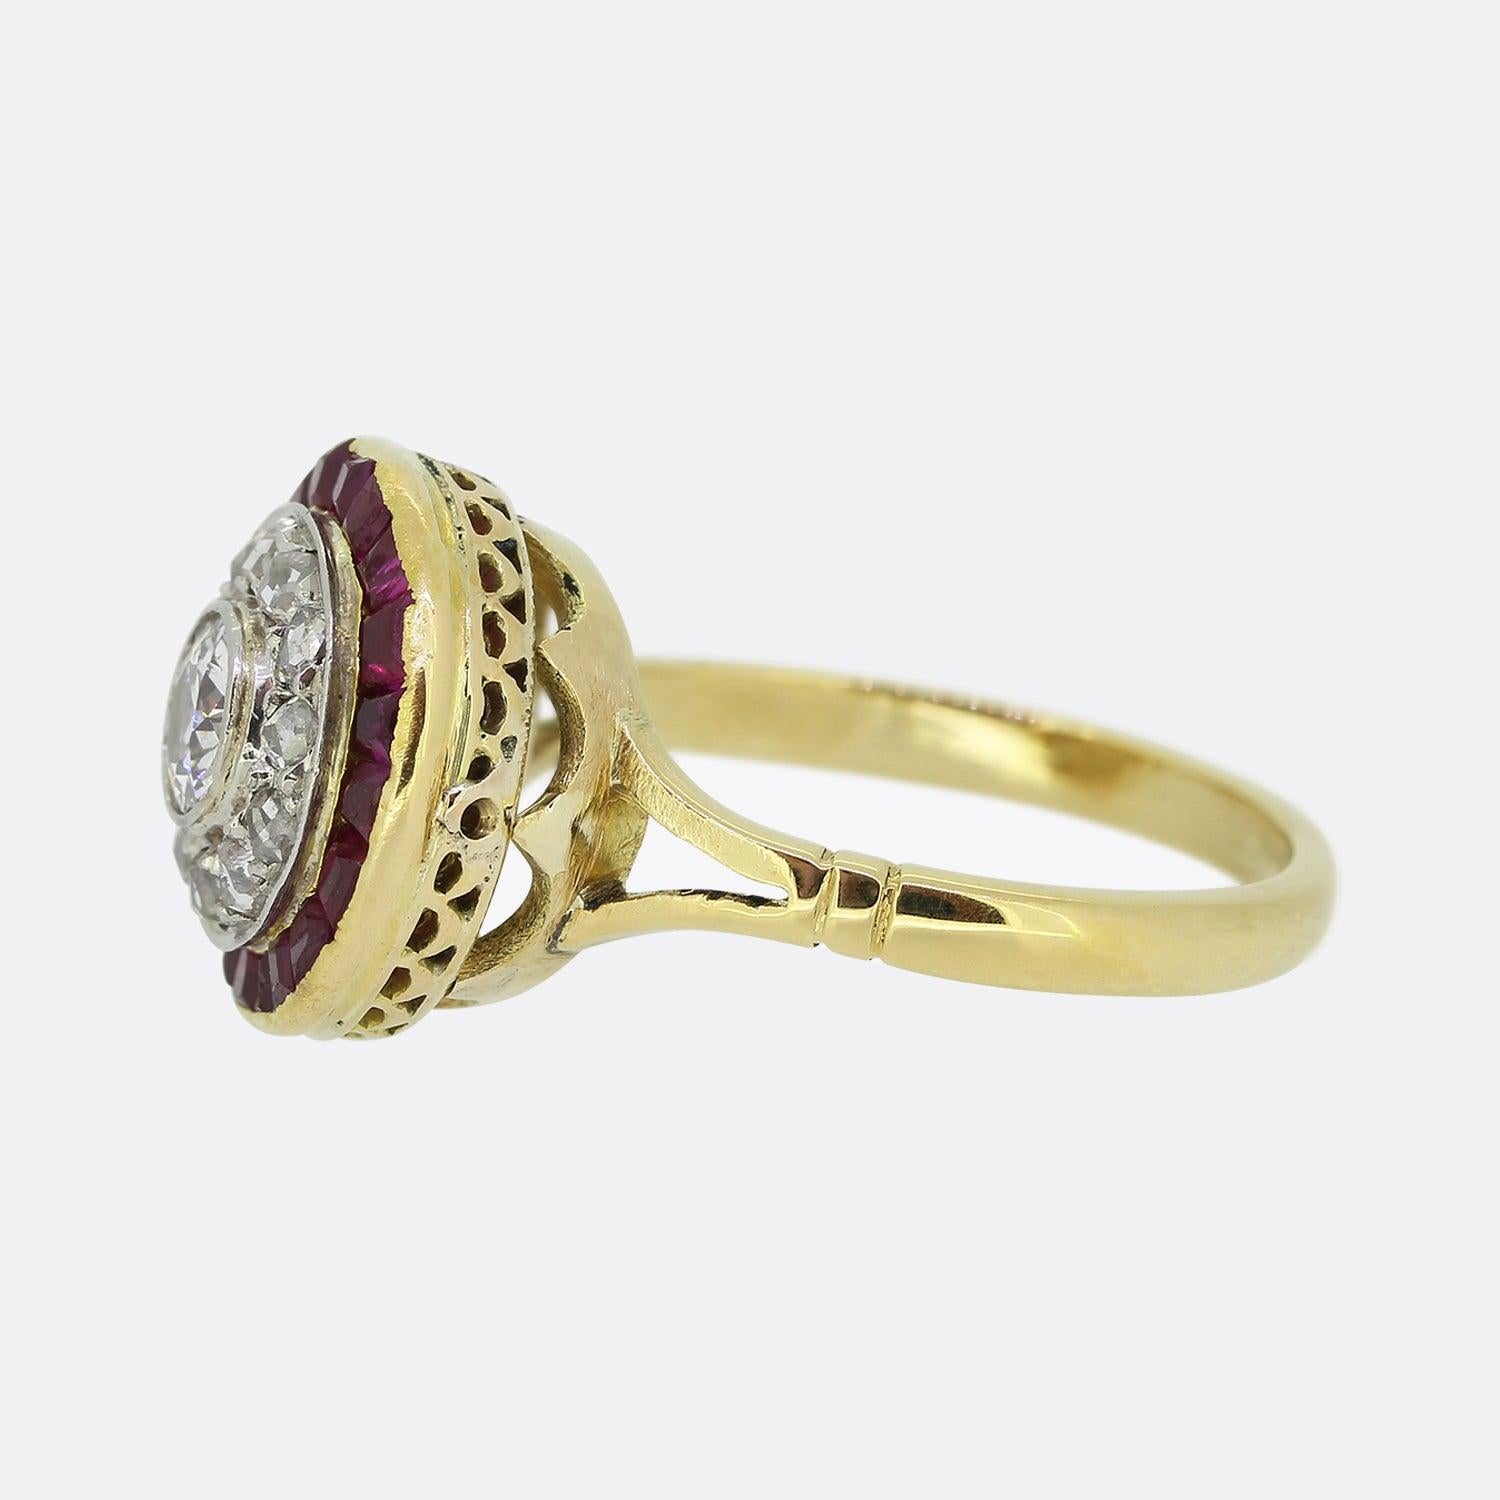 Here we have an 18ct yellow gold ruby and diamond cluster ring from the Victorian era. This multi-layered piece consists of a single round faceted old cut diamond at the centre which sits slightly risen in a rub-over setting. This principle stone is